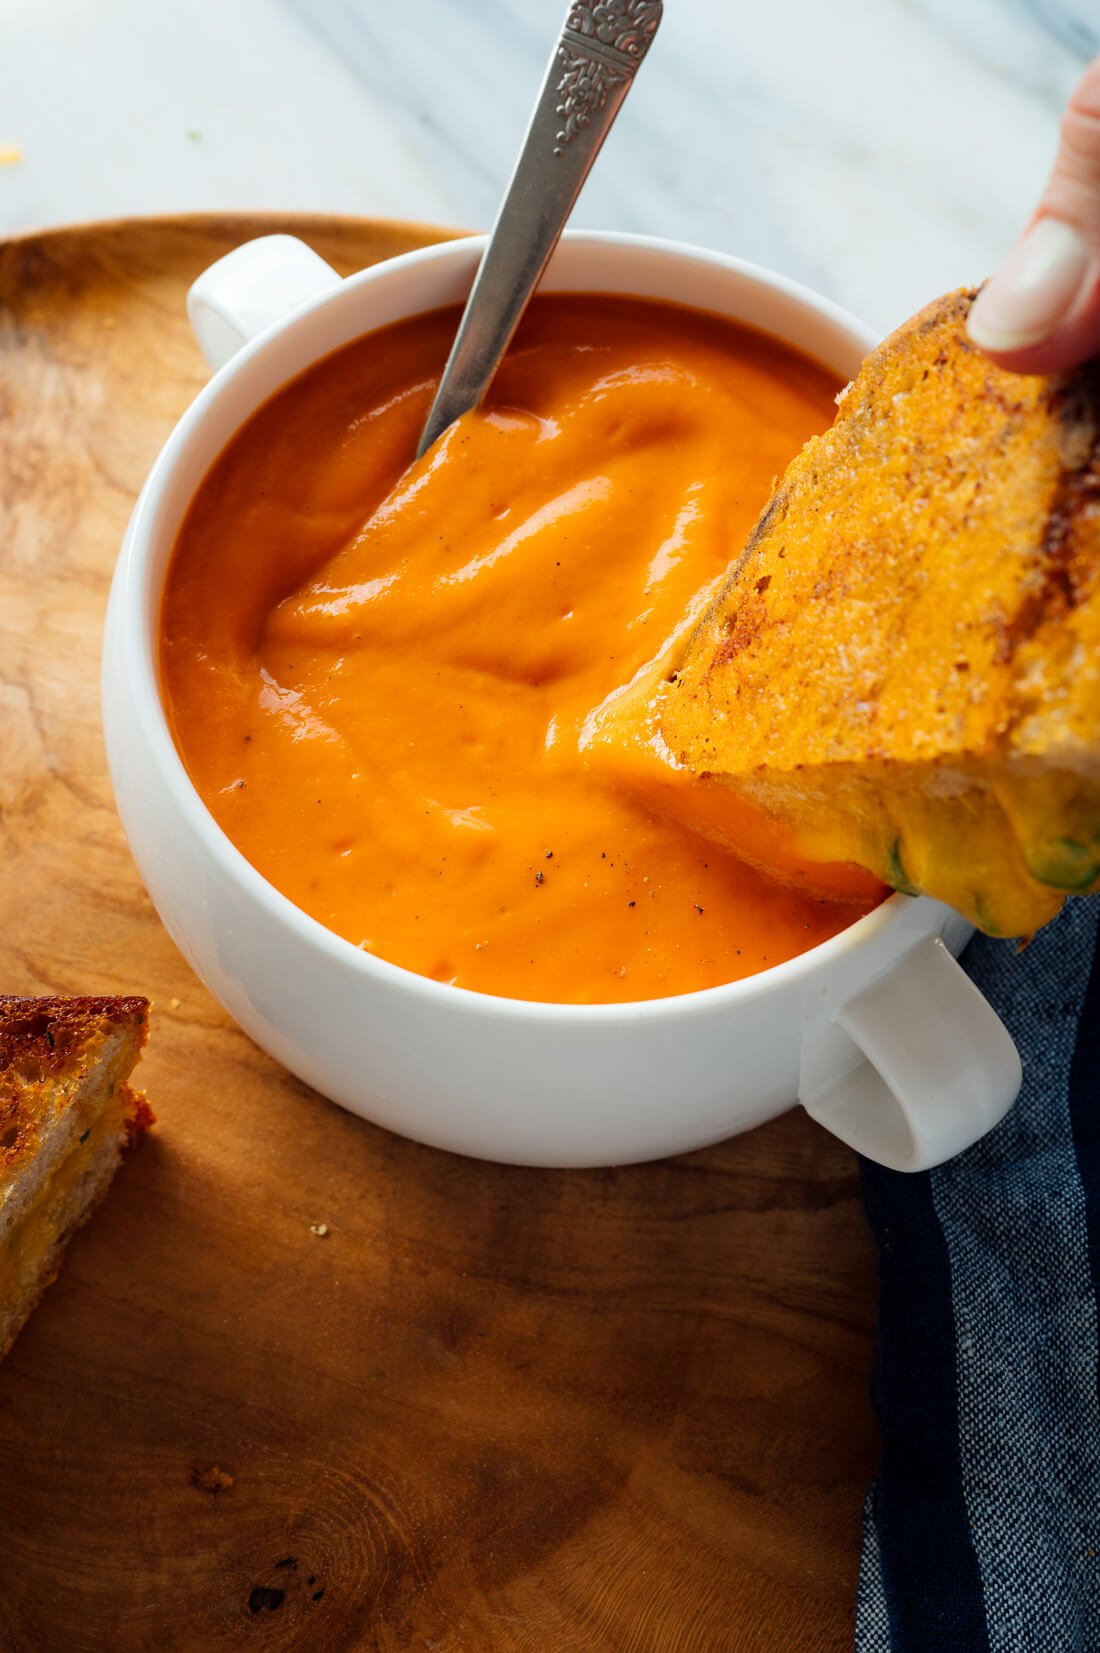 grilled cheese dipping into tomato soup